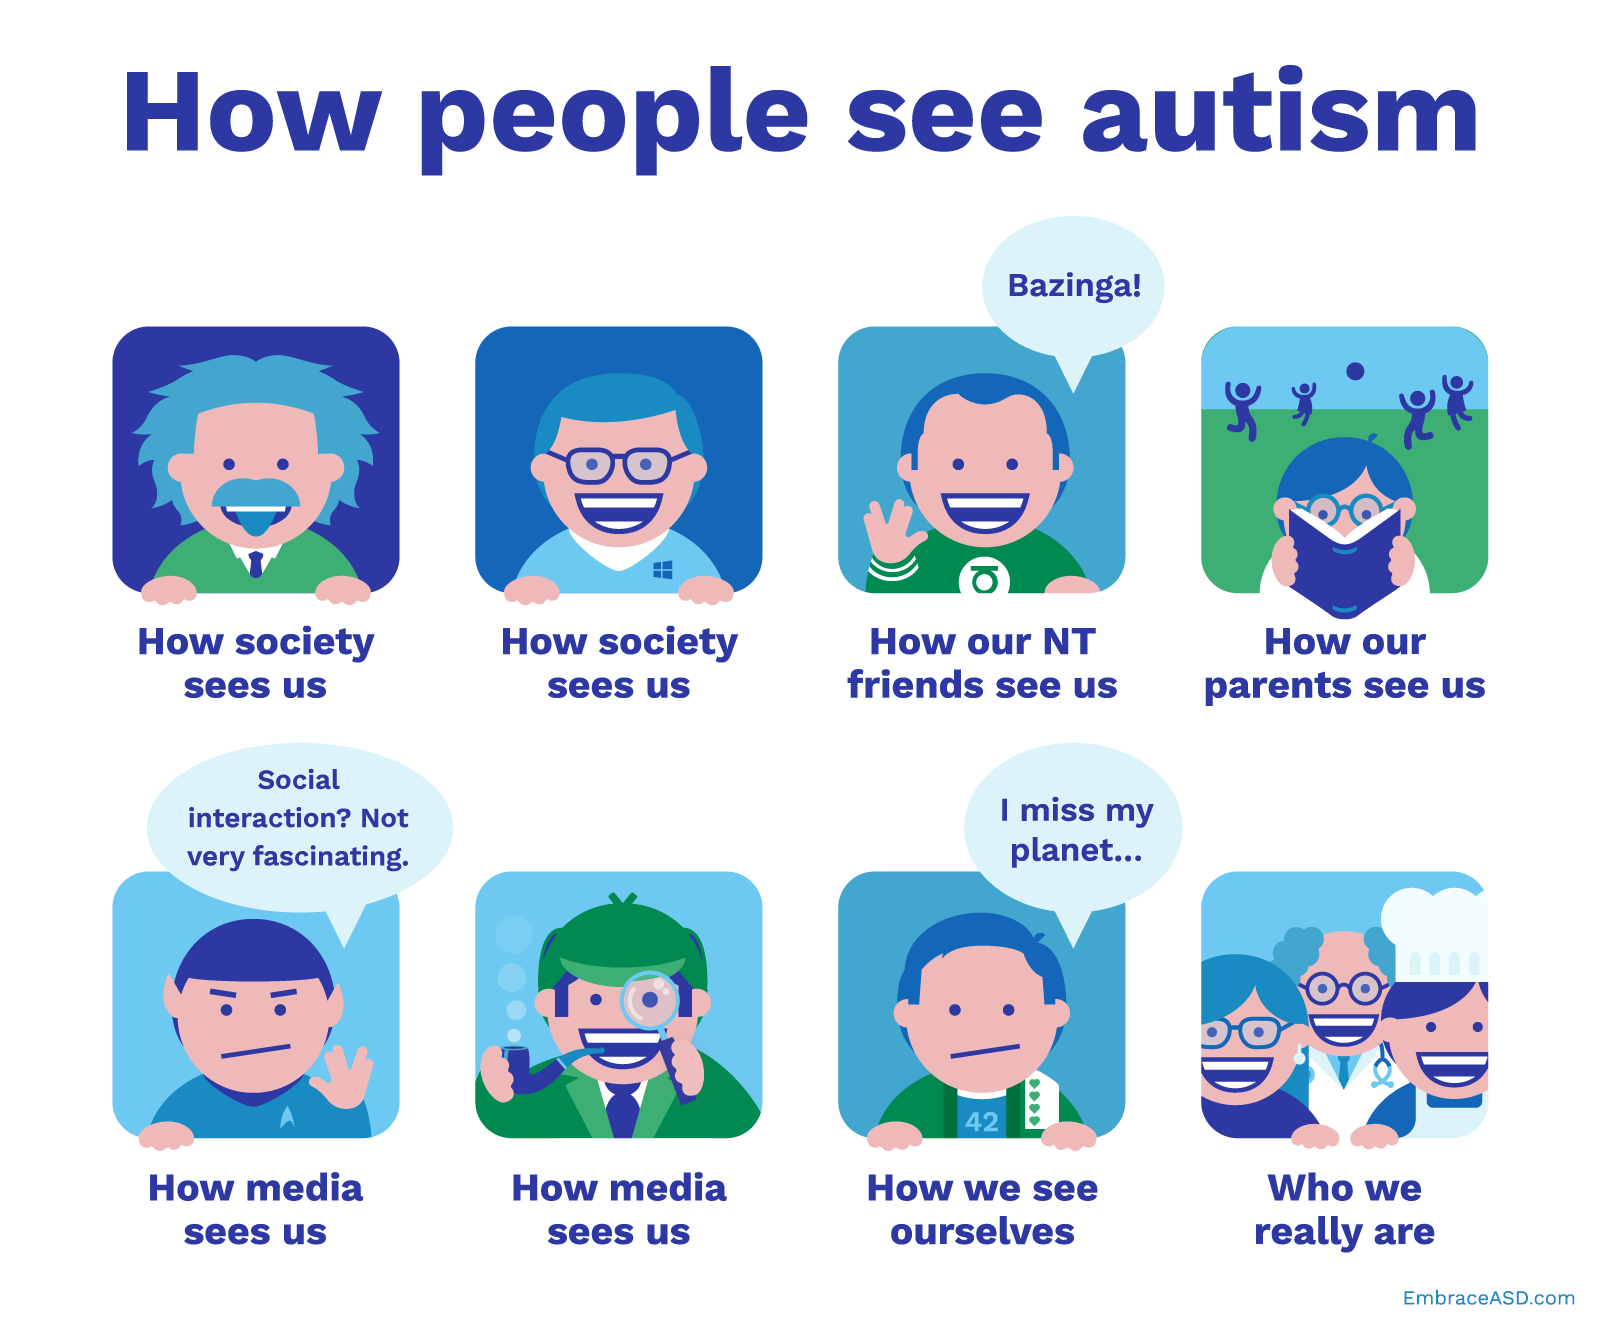 to download the 'How people see autism' image at the beginning of...